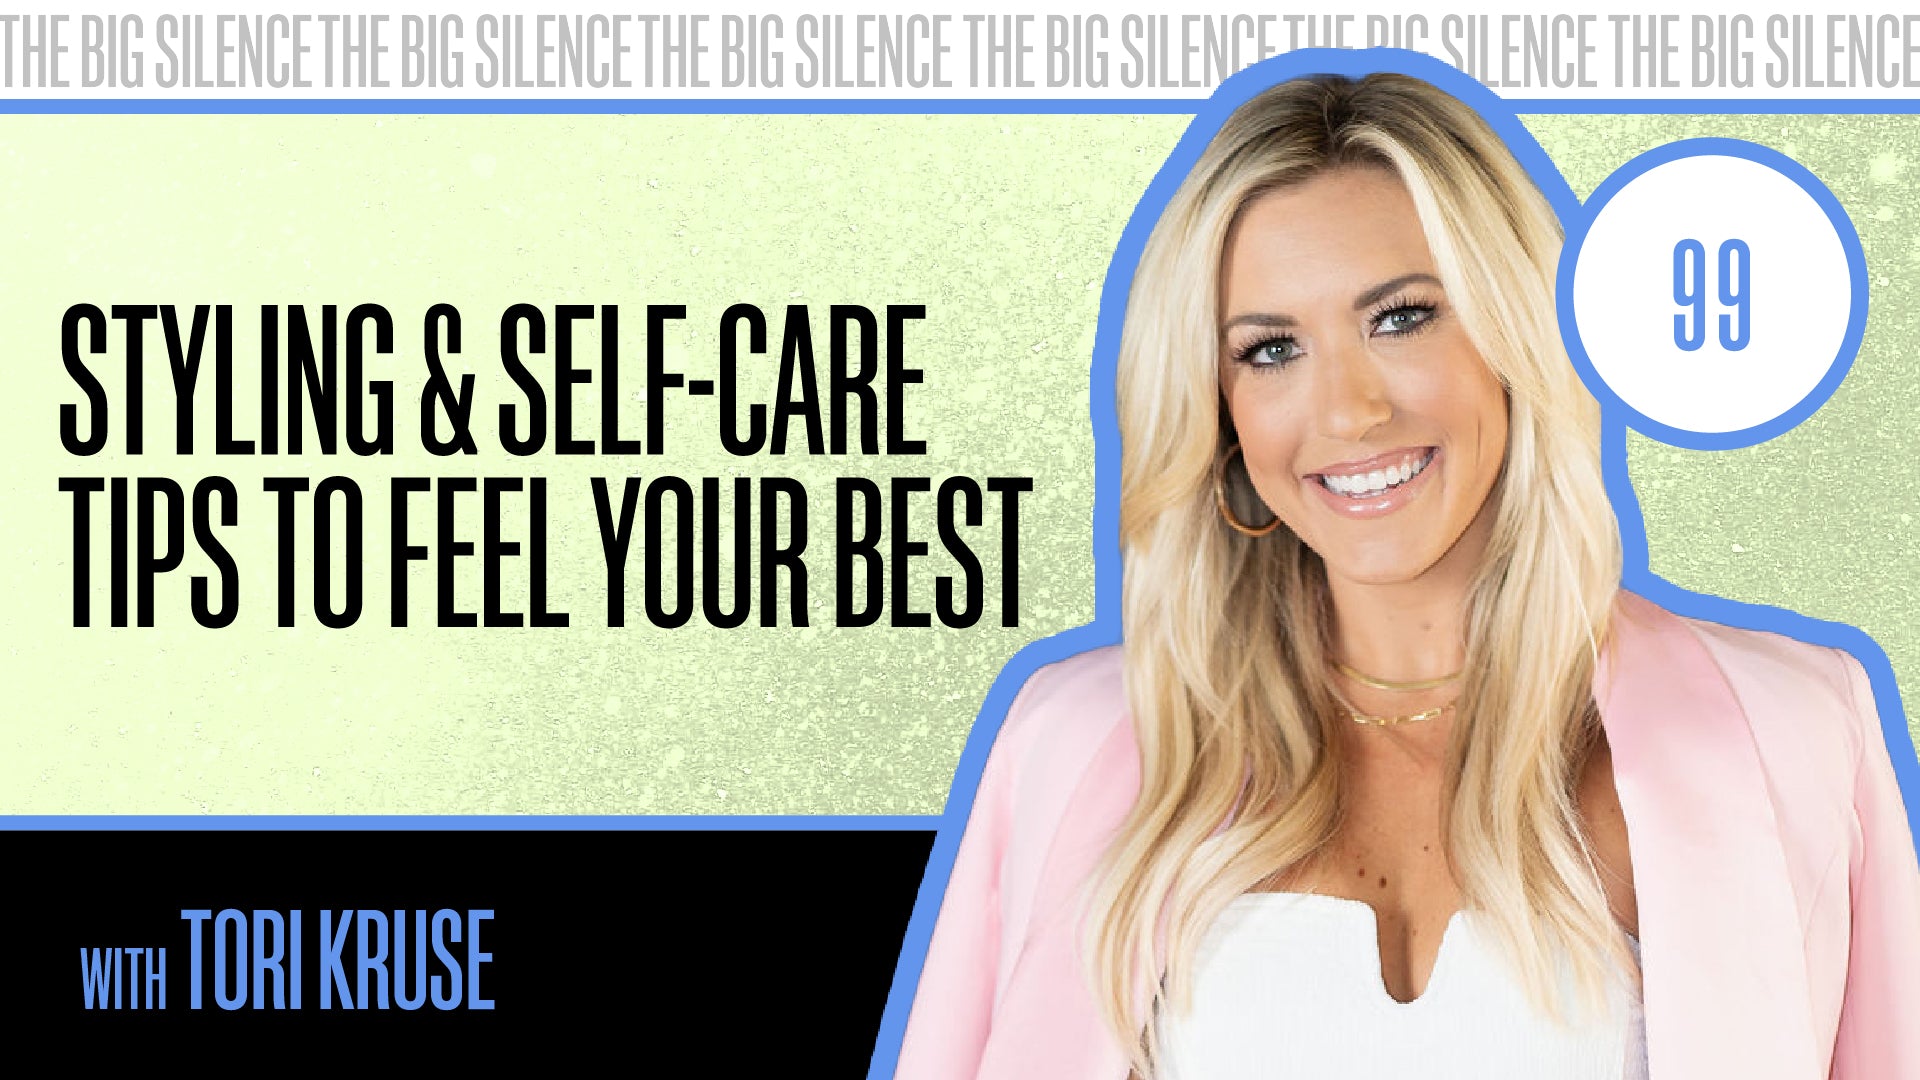 99. BUILDING A CONFIDENT MINDSET: STYLING & SELF-CARE TIPS TO FEEL YOUR BEST WITH TORI KRUSE